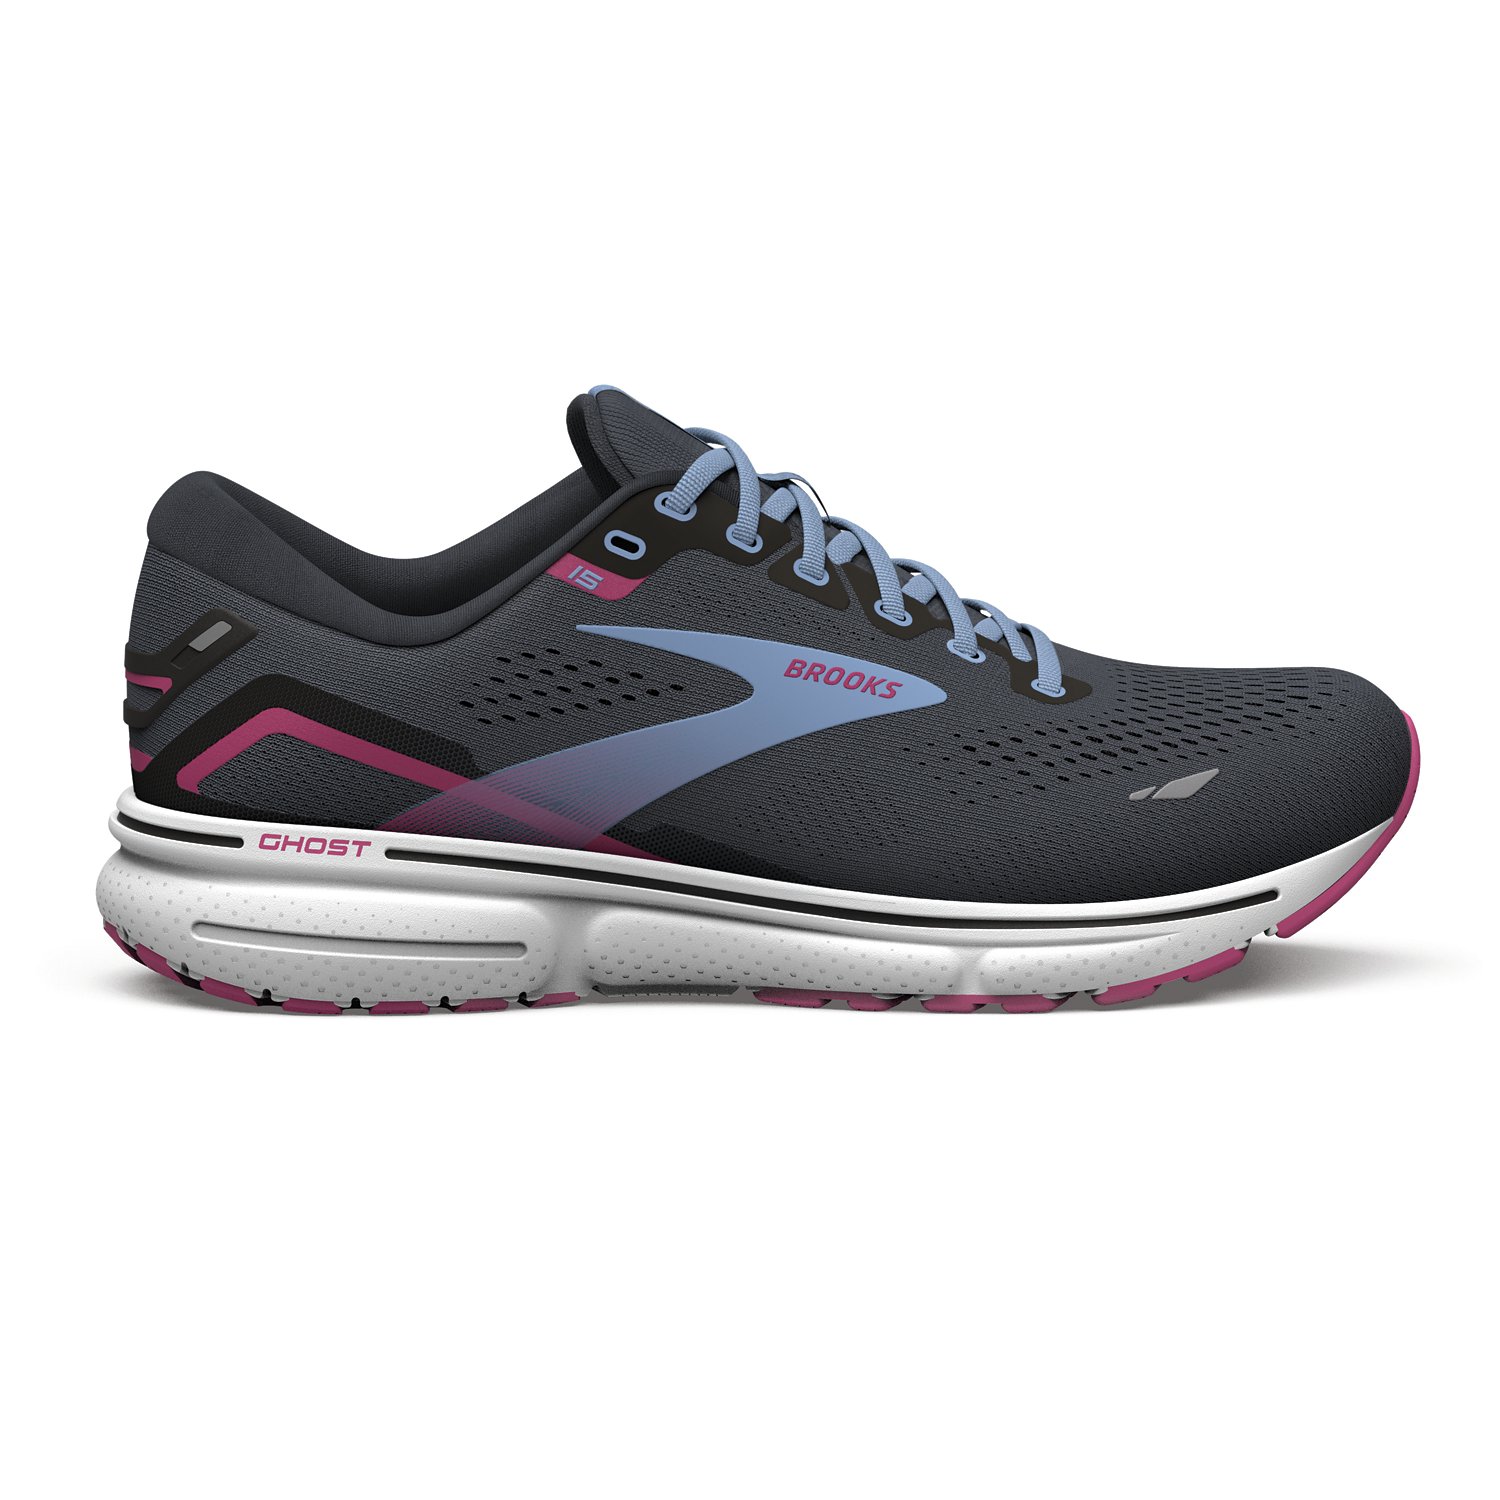 https://academy.scene7.com/is/image/academy//running-shoes/brooks-womens-ghost-15-running-shoes-120380-1b-082-black/og-image/a2b35bd6-cc2e-4847-8035-8f774866a260